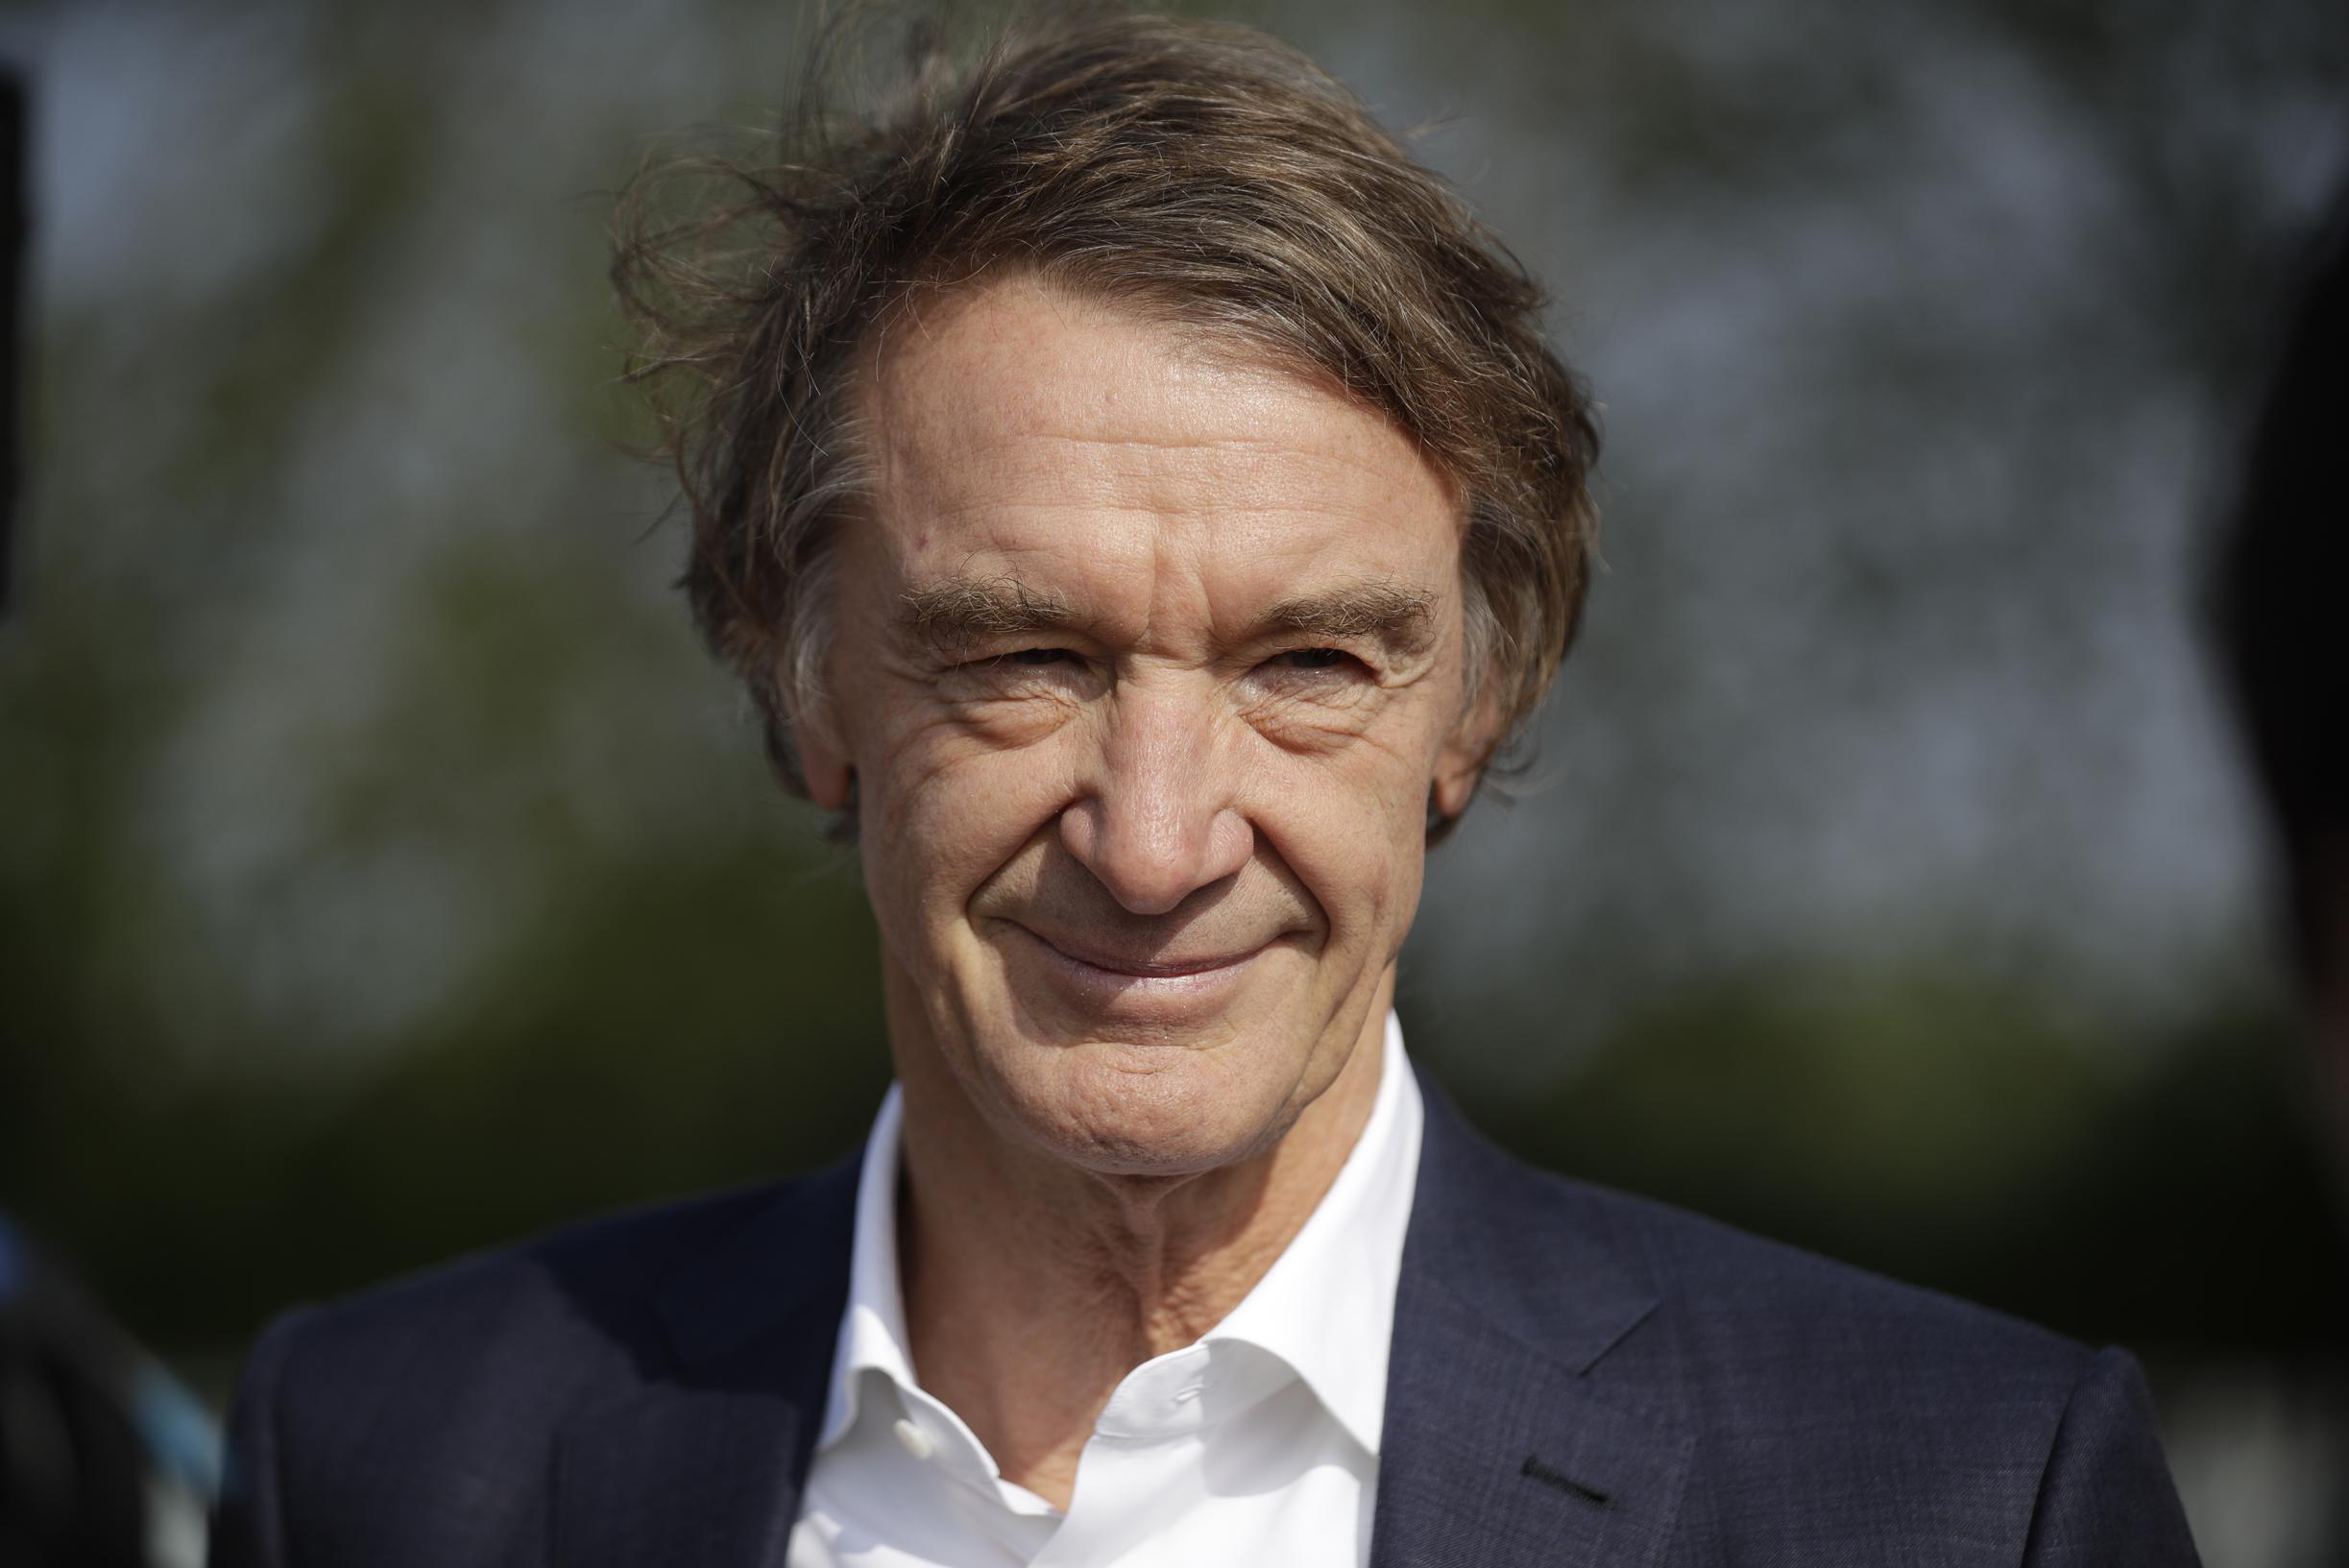 Manchester United officially welcomes INEOS boss Jim Ratcliffe as co-owner